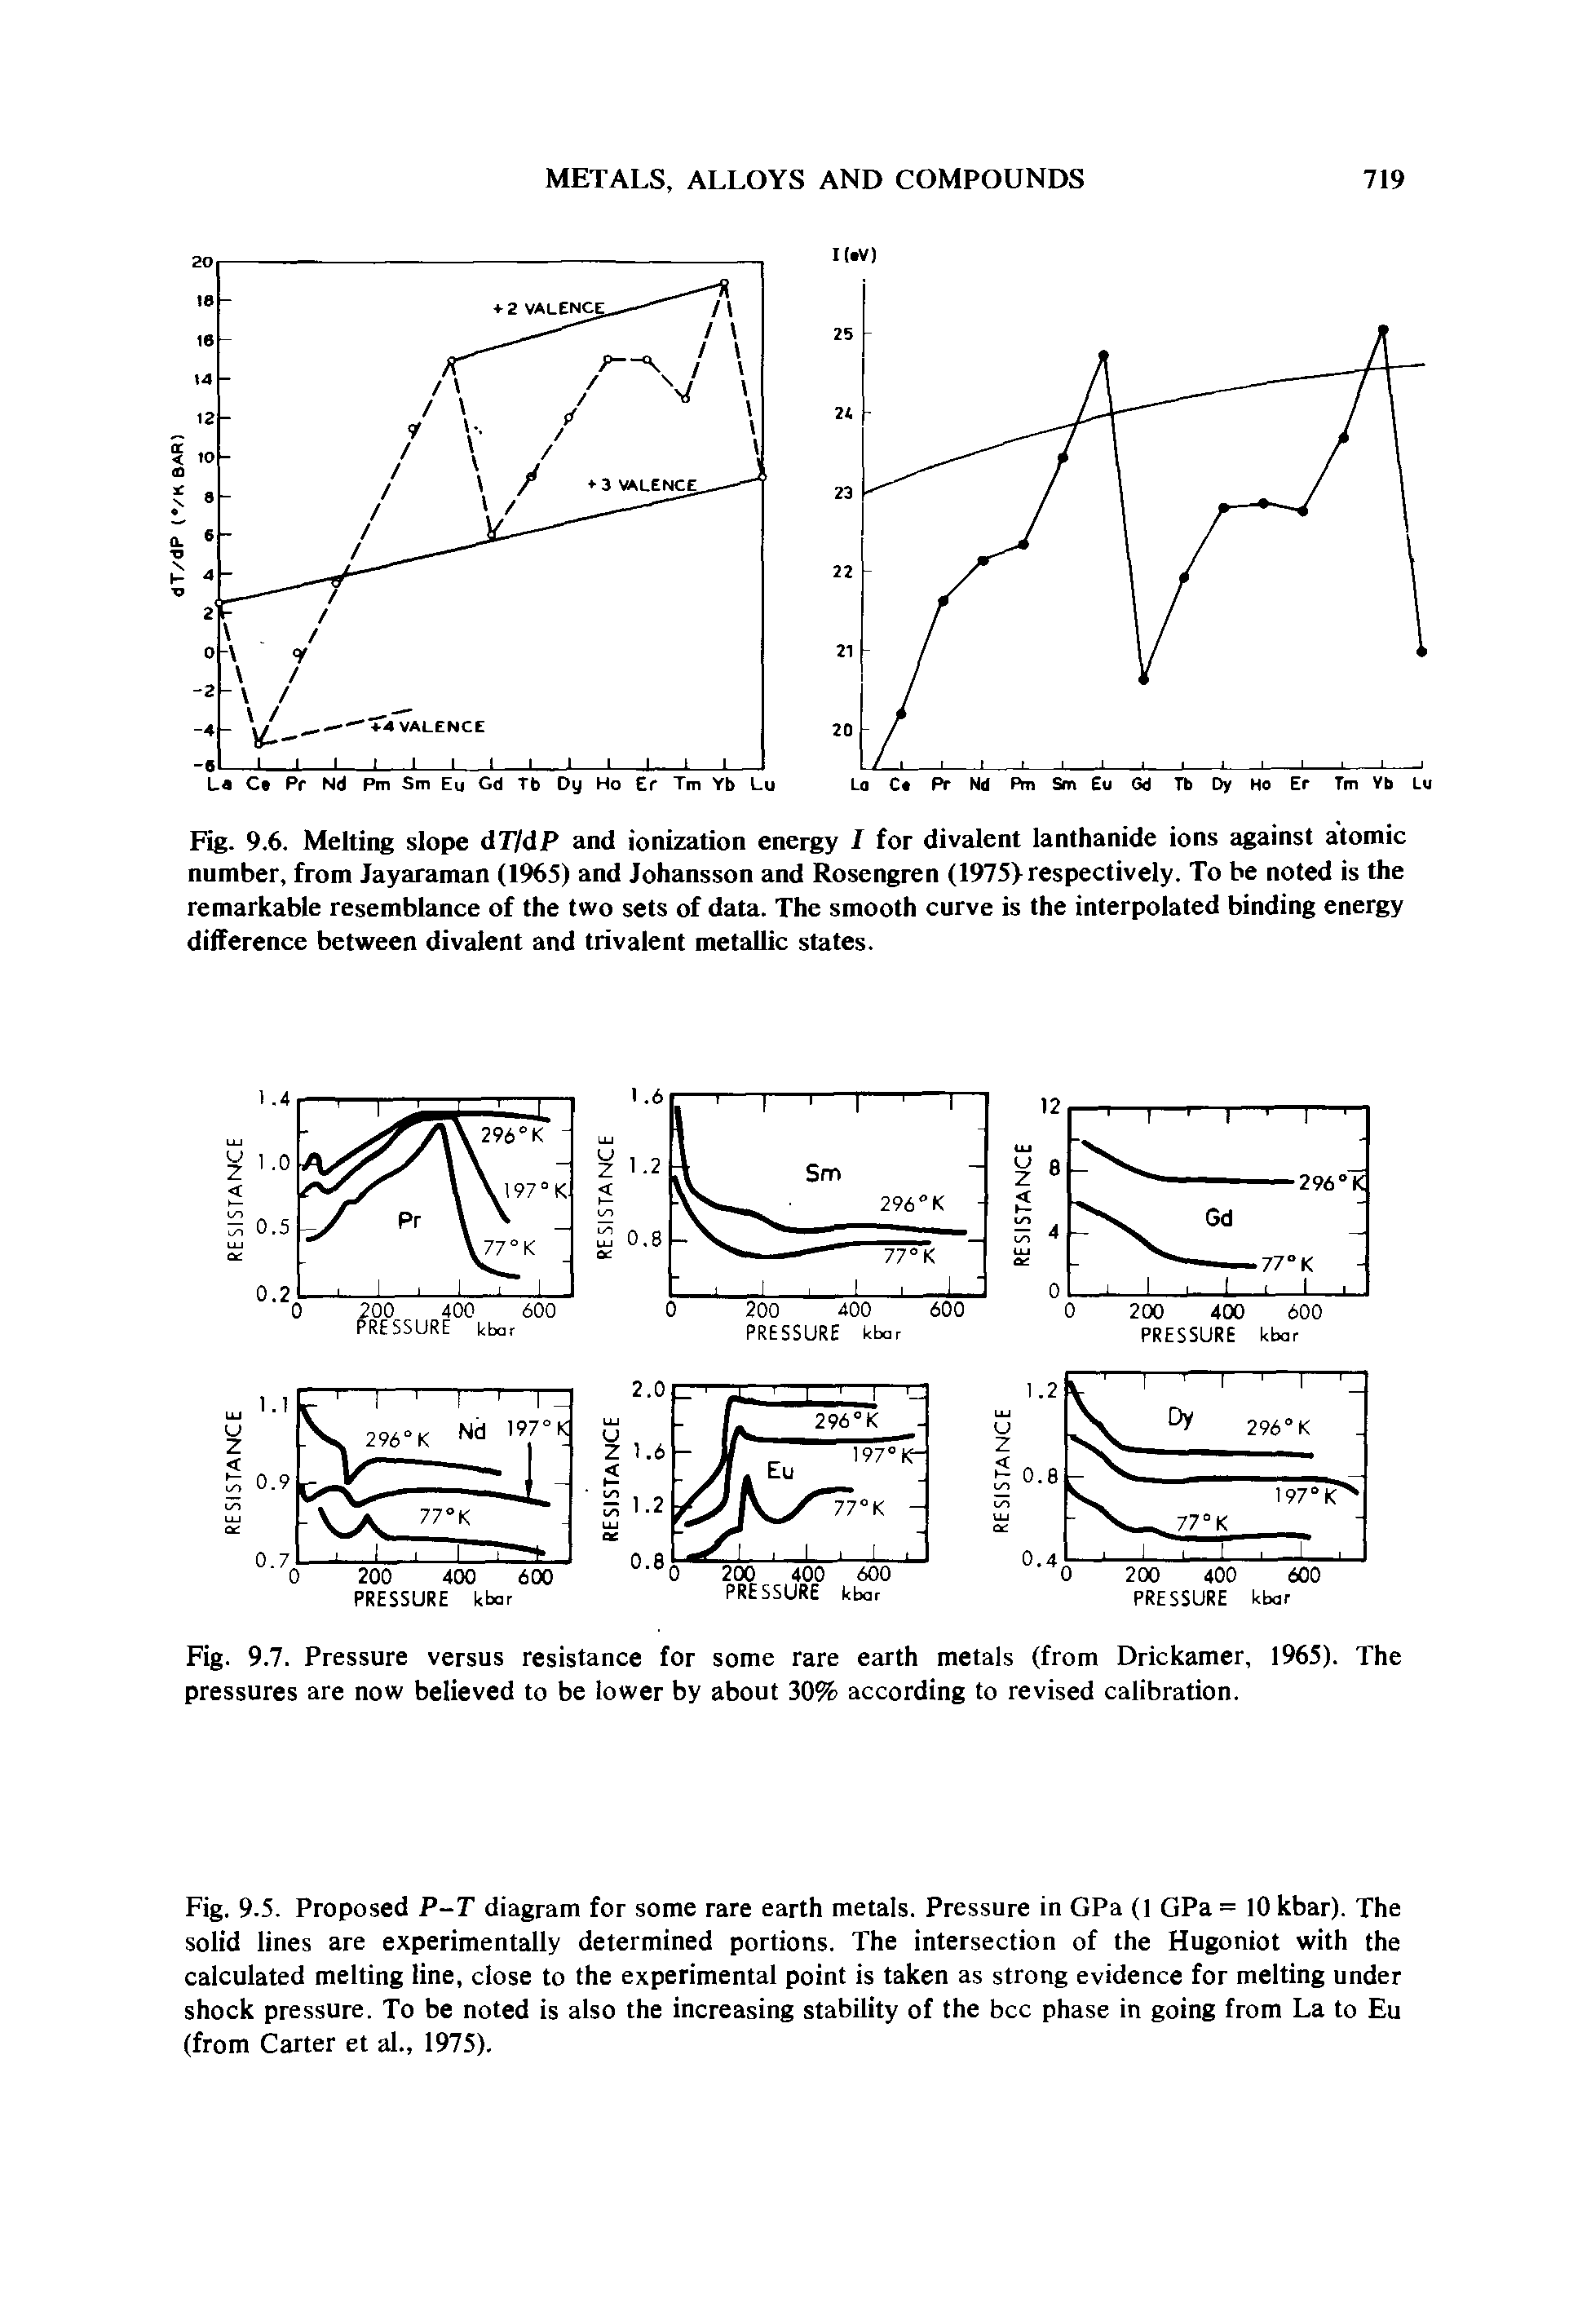 Fig. 9.6. Melting slope dT/dP and ionization energy I for divalent lanthanide ions against atomic number, from Jayaraman (1965) and Johansson and Rosengren (1975> respectively. To be noted is the remarkable resemblance of the two sets of data. The smooth curve is the interpolated binding energy difference between divalent and trivalent metallic states.